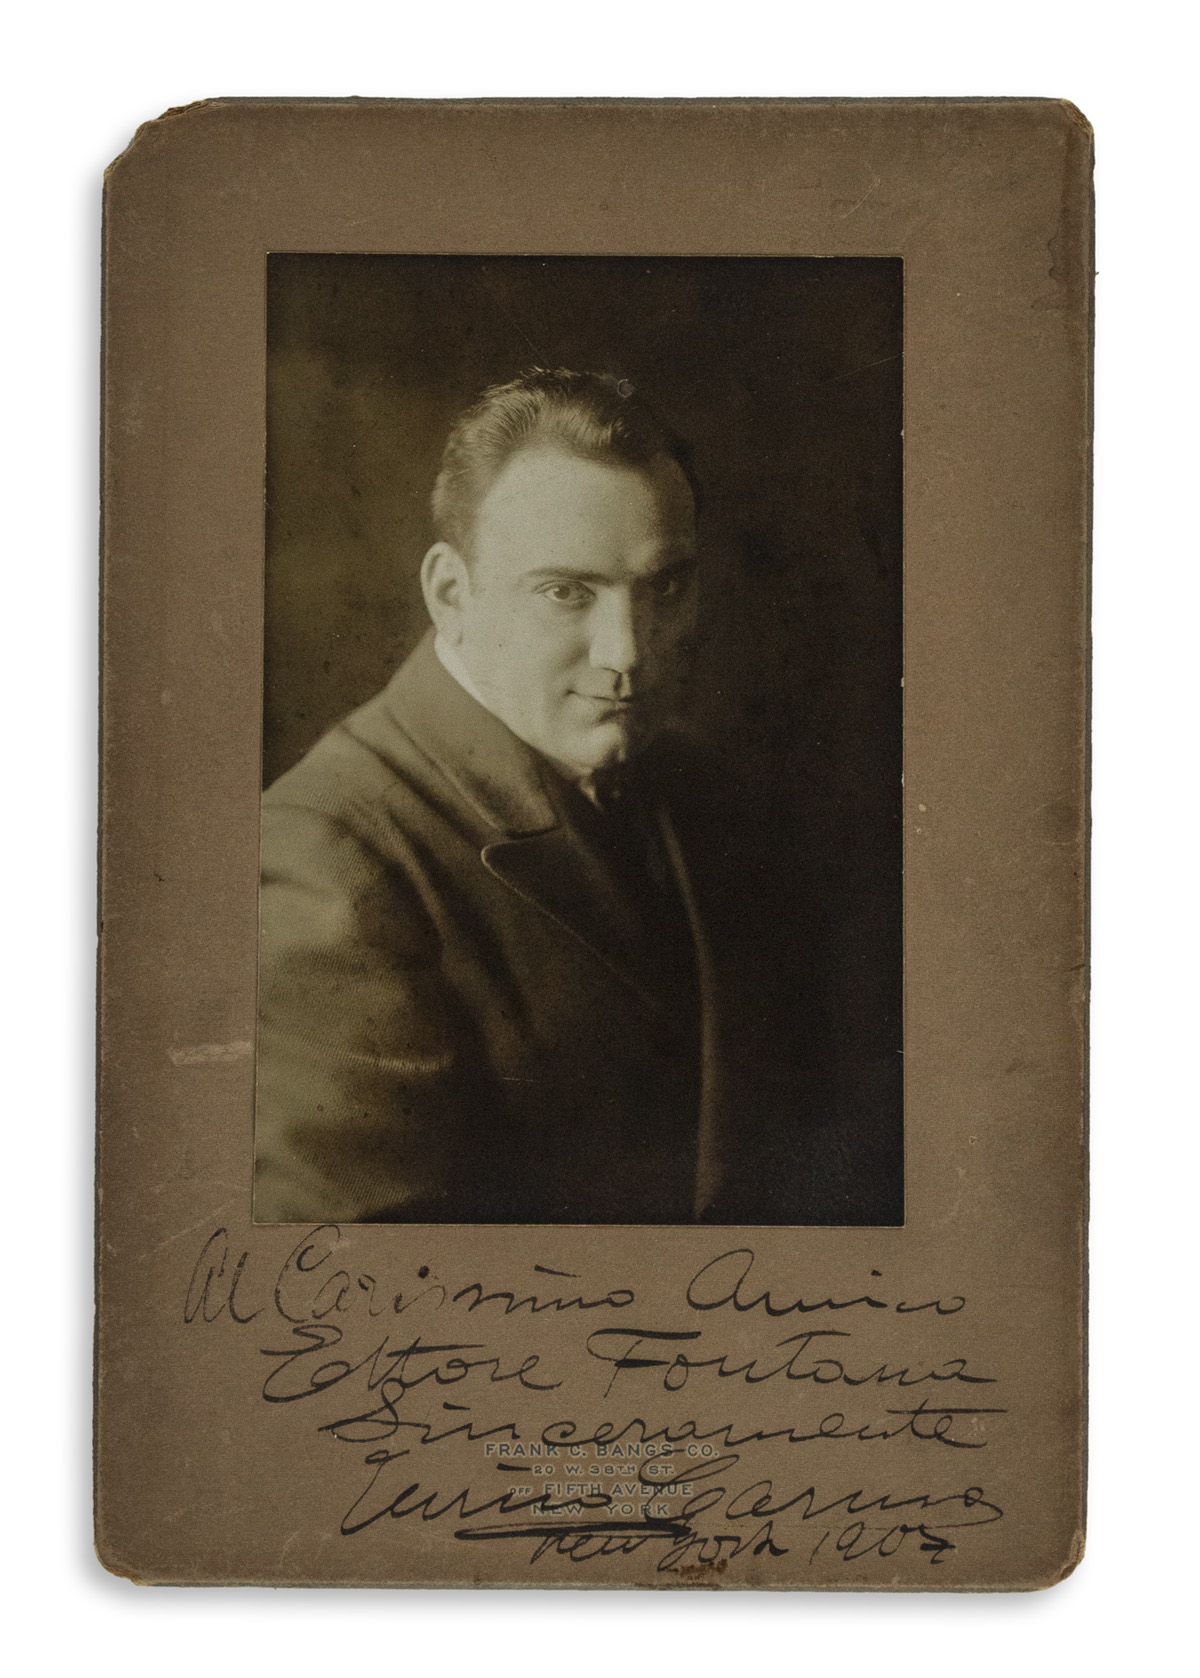 CARUSO, ENRICO. Photograph Signed and Inscribed, To My Dear Friend / Ettore Fontana / Sincerely,